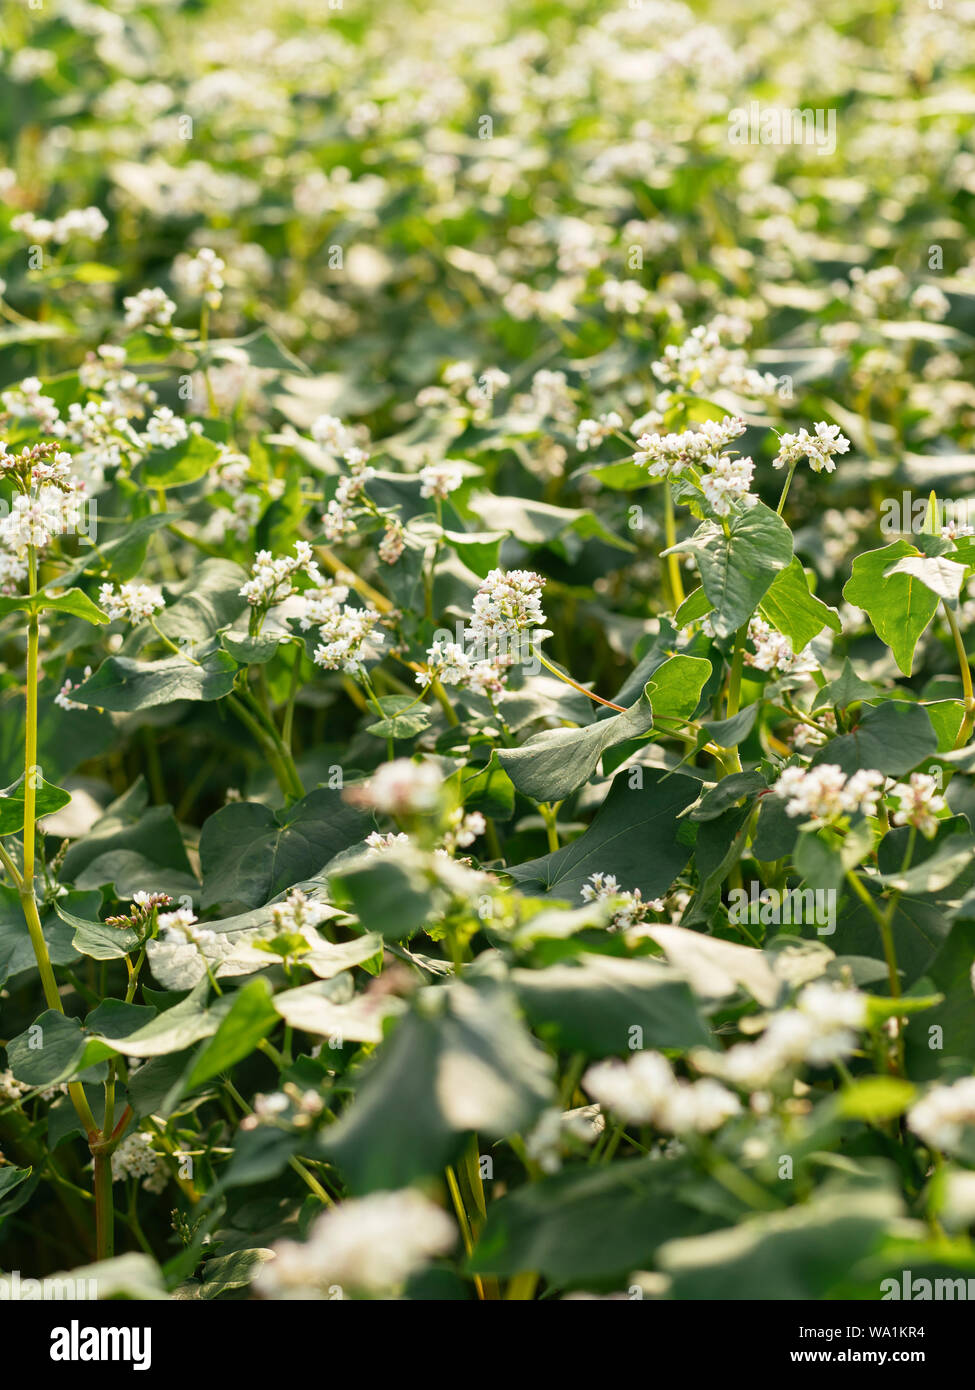 Blooming Buckwheat As Green Manure And Cover Crop In An Organic